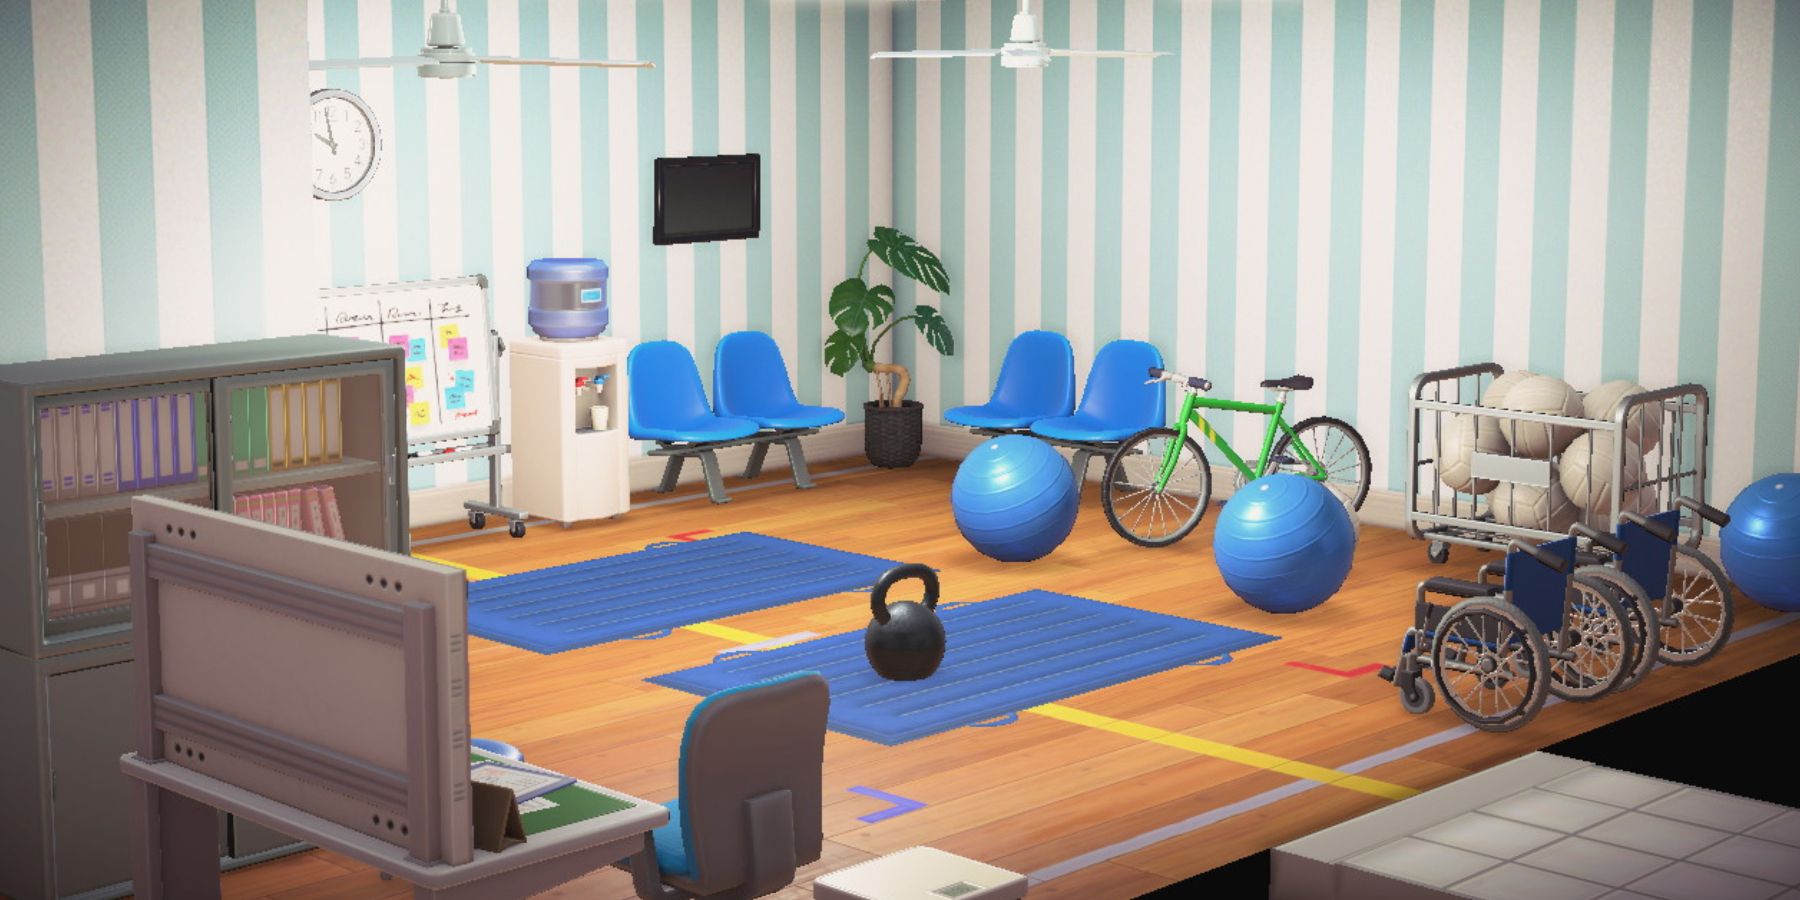 Players can design a physical therapy gym in Animal Crossing Happy Home Paradise.